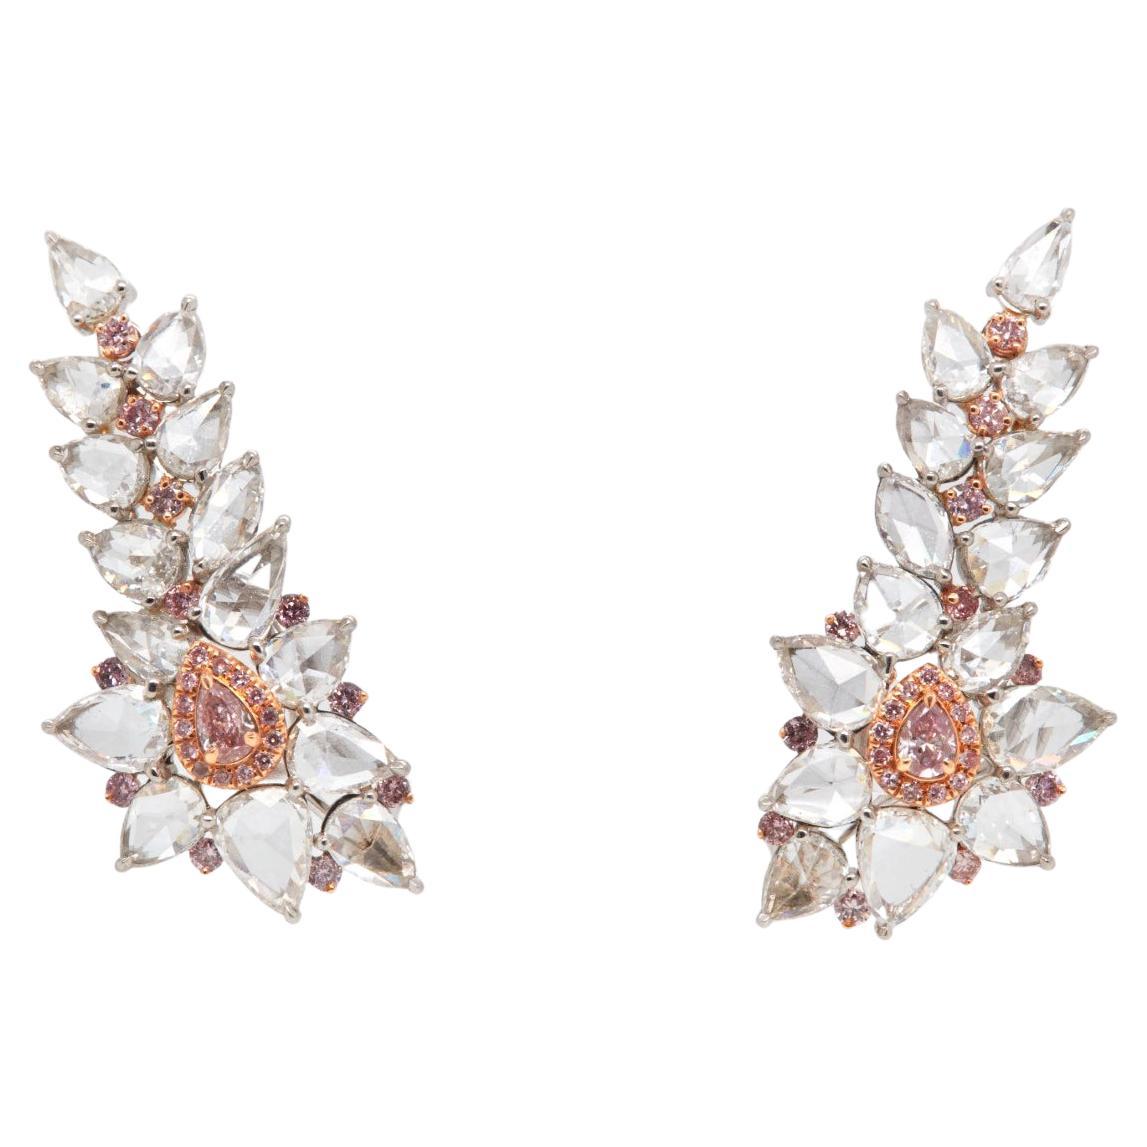 10 Carat Fancy Pink and White Diamond Cluster Earrings, GIA Certified 18K Gold